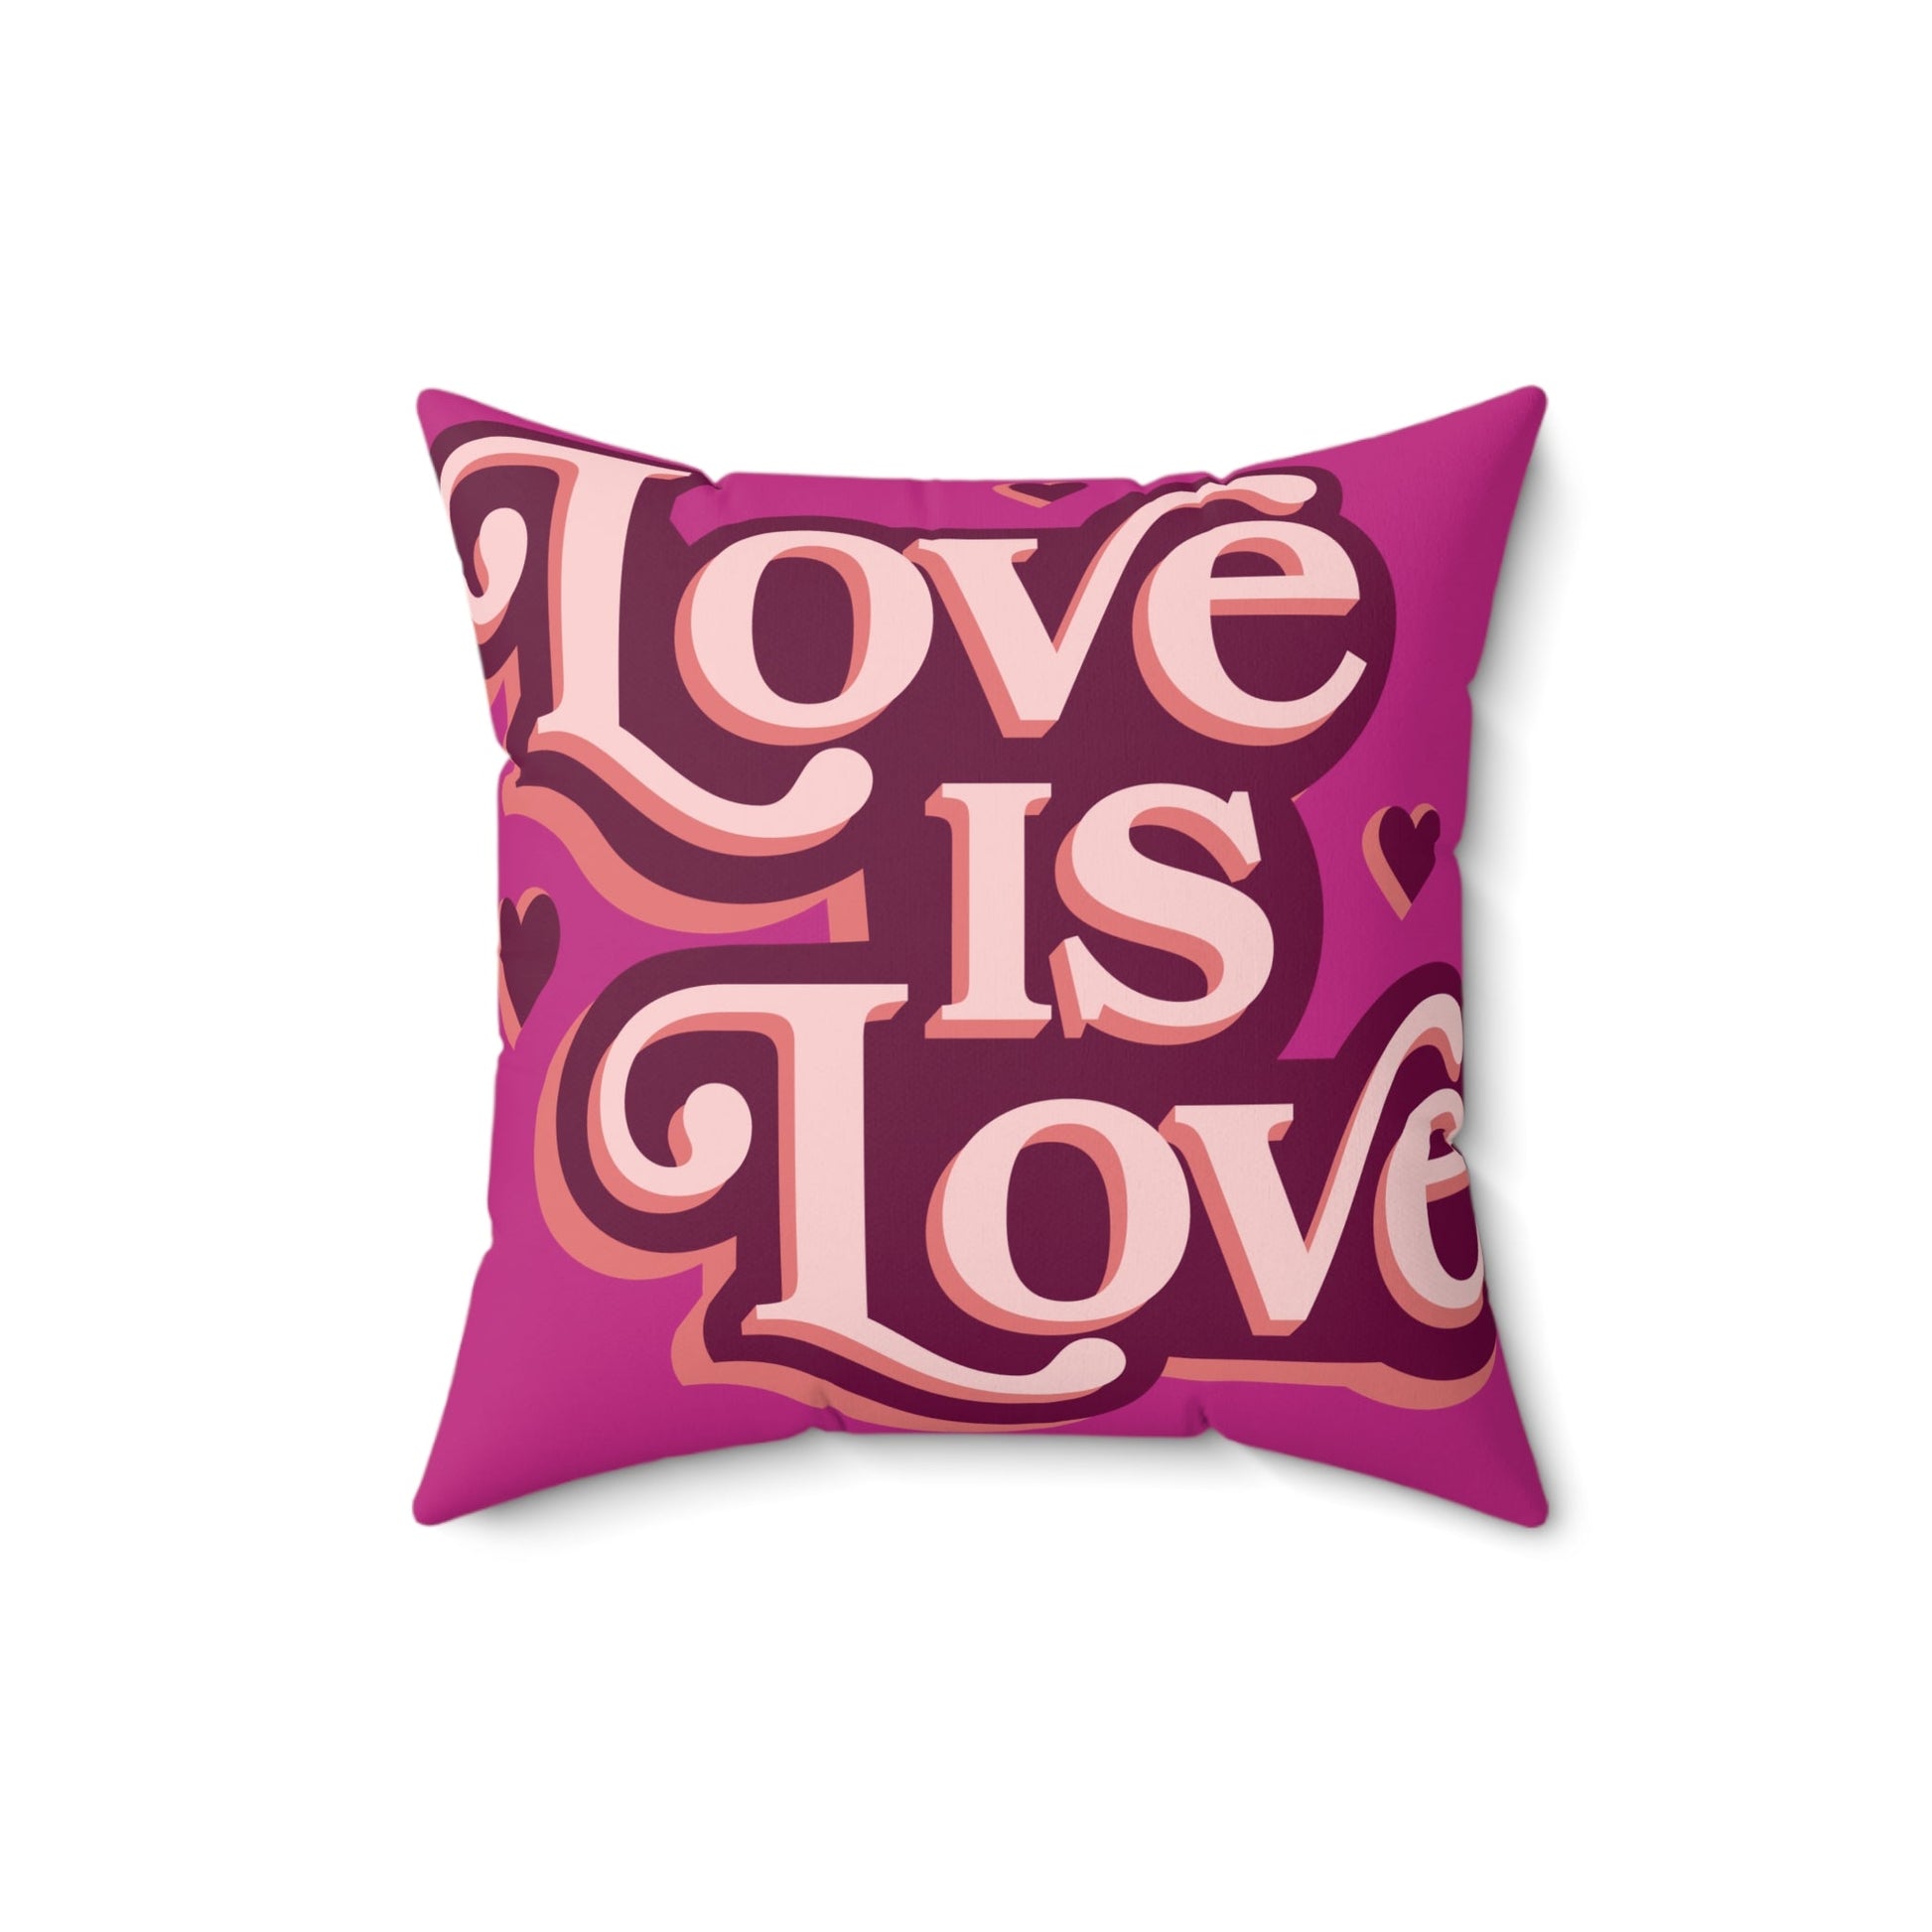 Love is Love Square Pillow - Wet Sundays